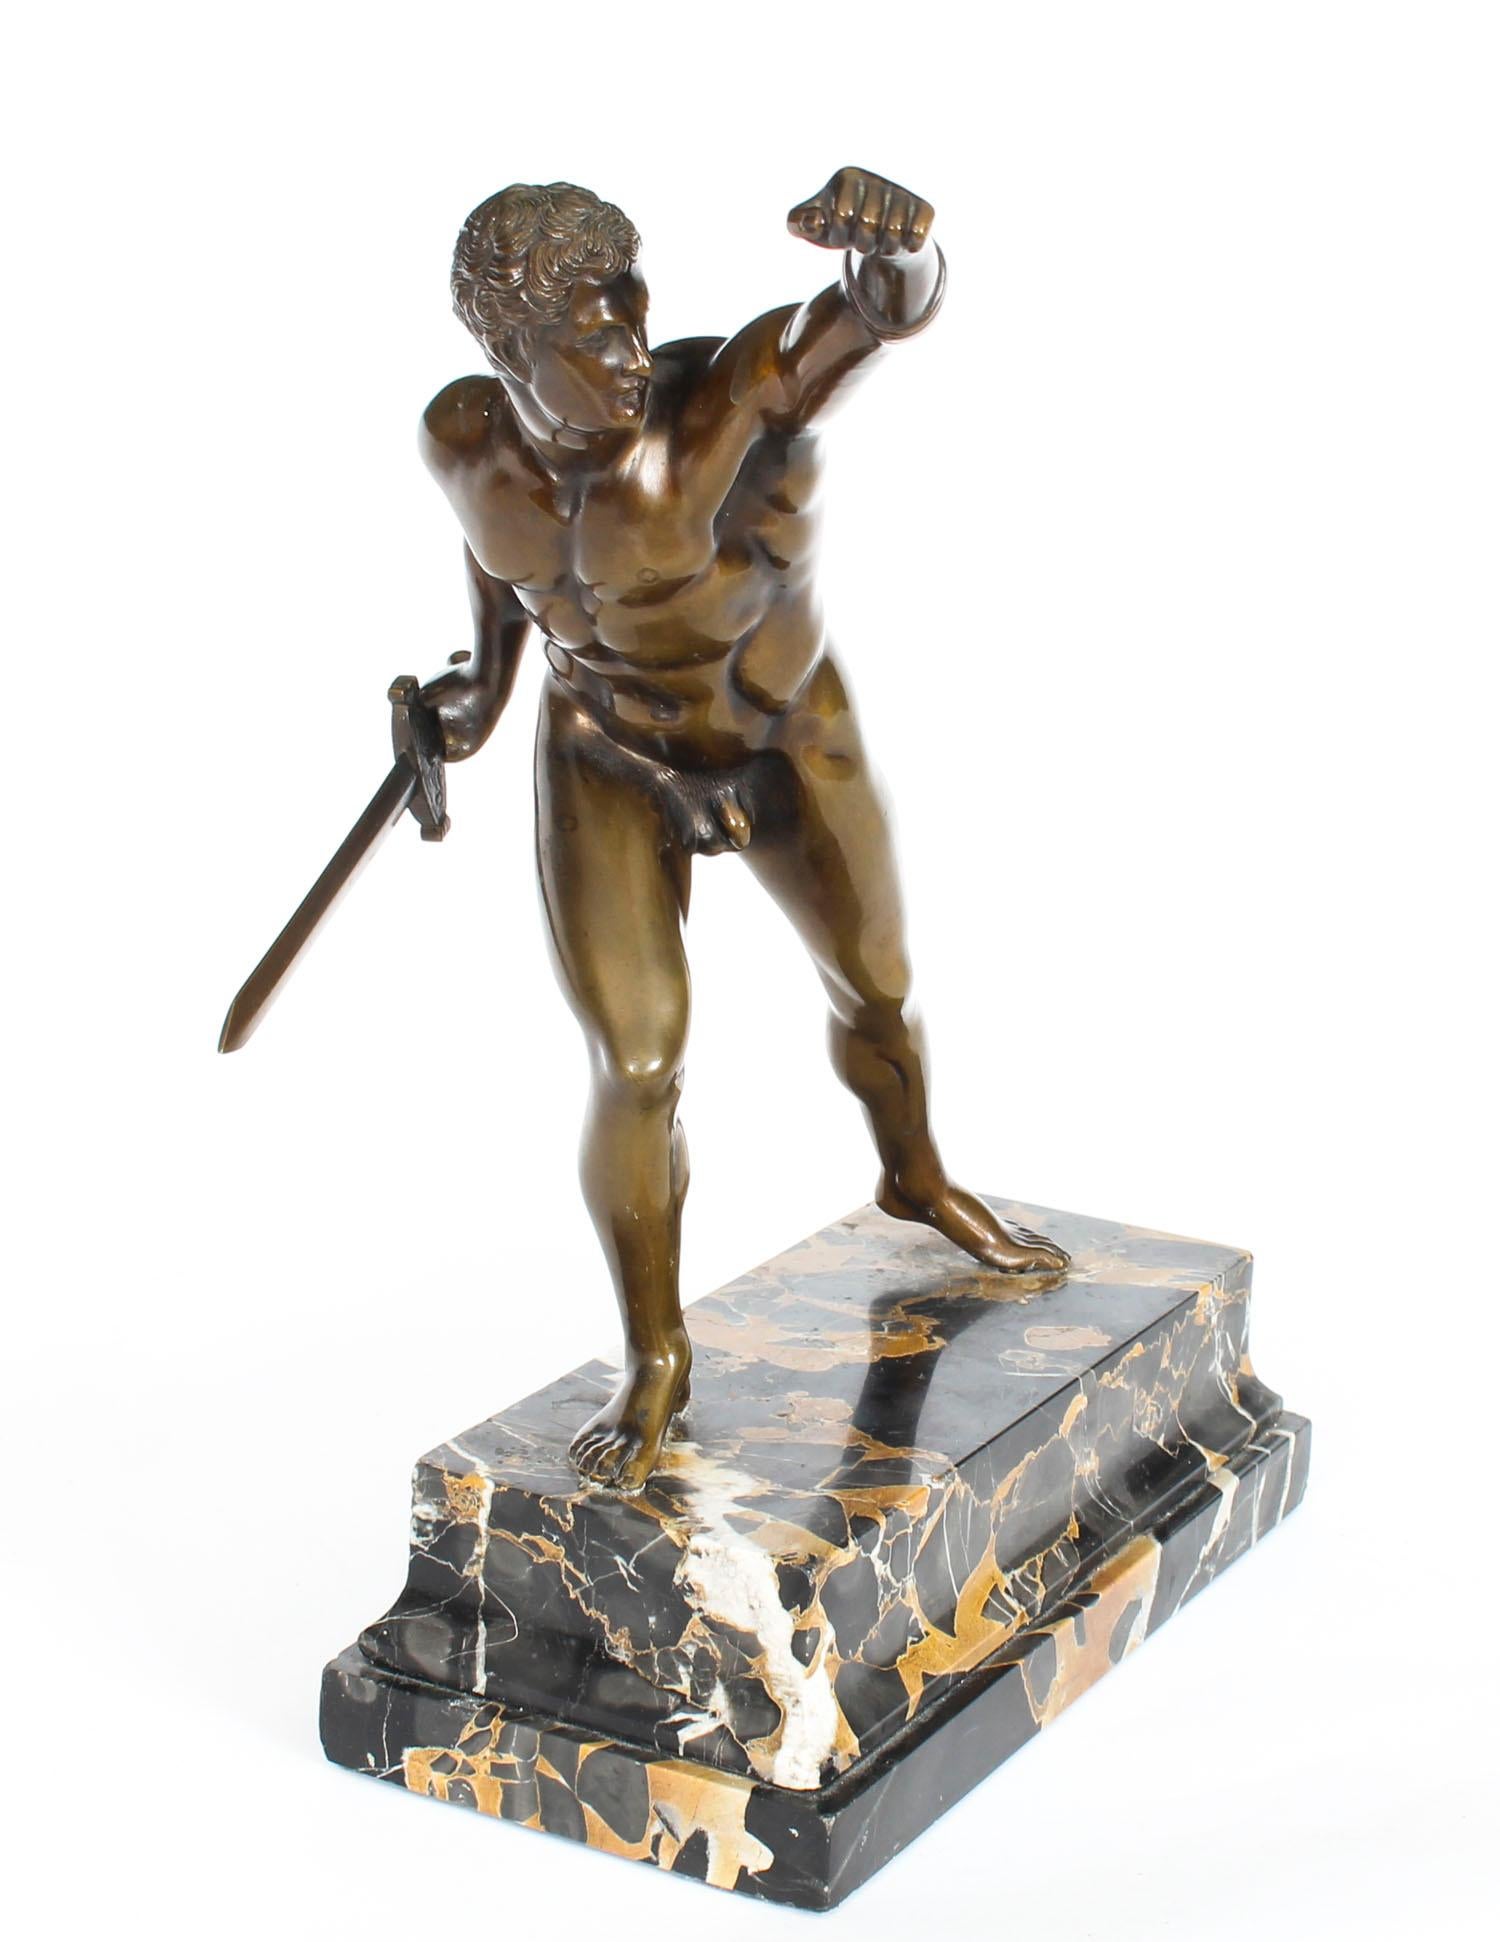 This is a gorgeous bronze statue of a Roman Borghese gladiator dating from circa 1870 in date. 
The attention to detail here is remarkable and this statue has a wonderful golden bronze patina, it is raised on a decorative variegated marble